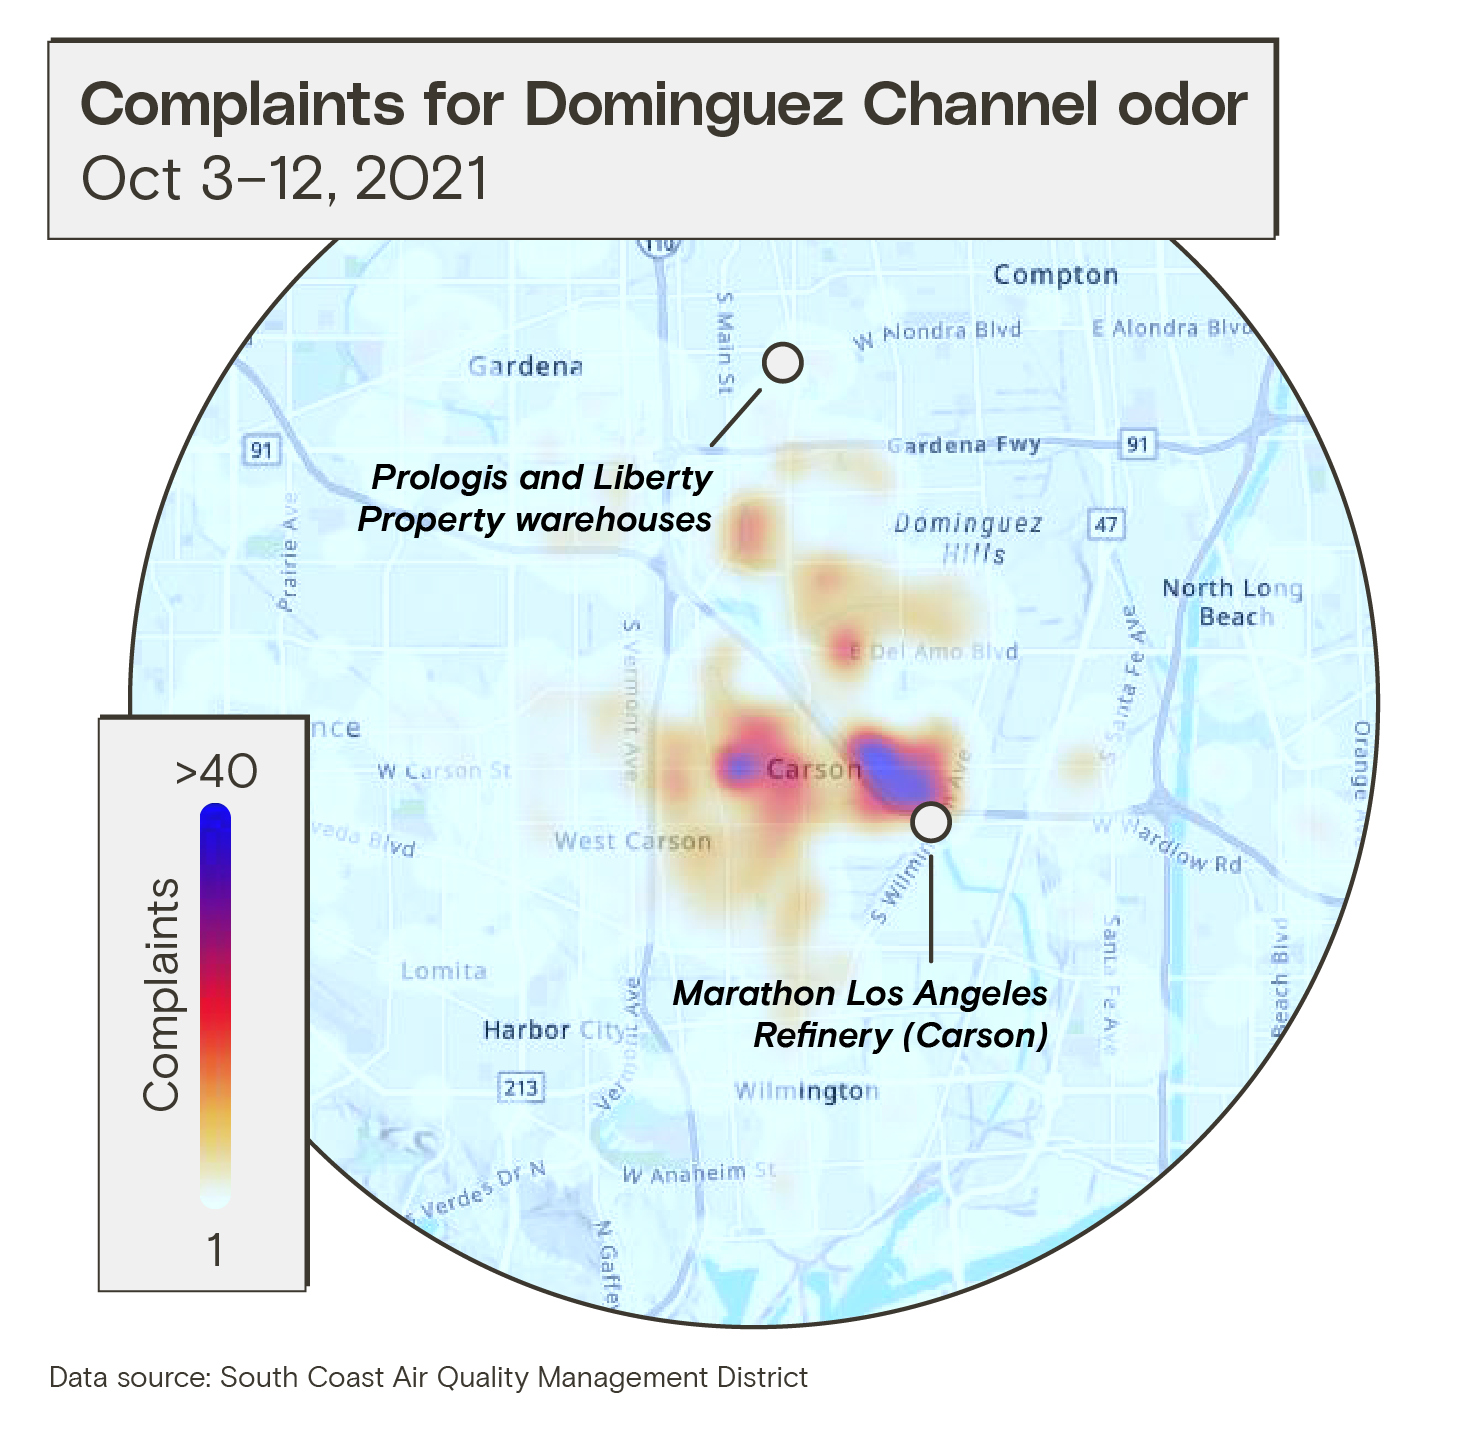 A map showing the distribution of complaints related to the Dominguez Channel odor incident (Oct 3–12, 2021).